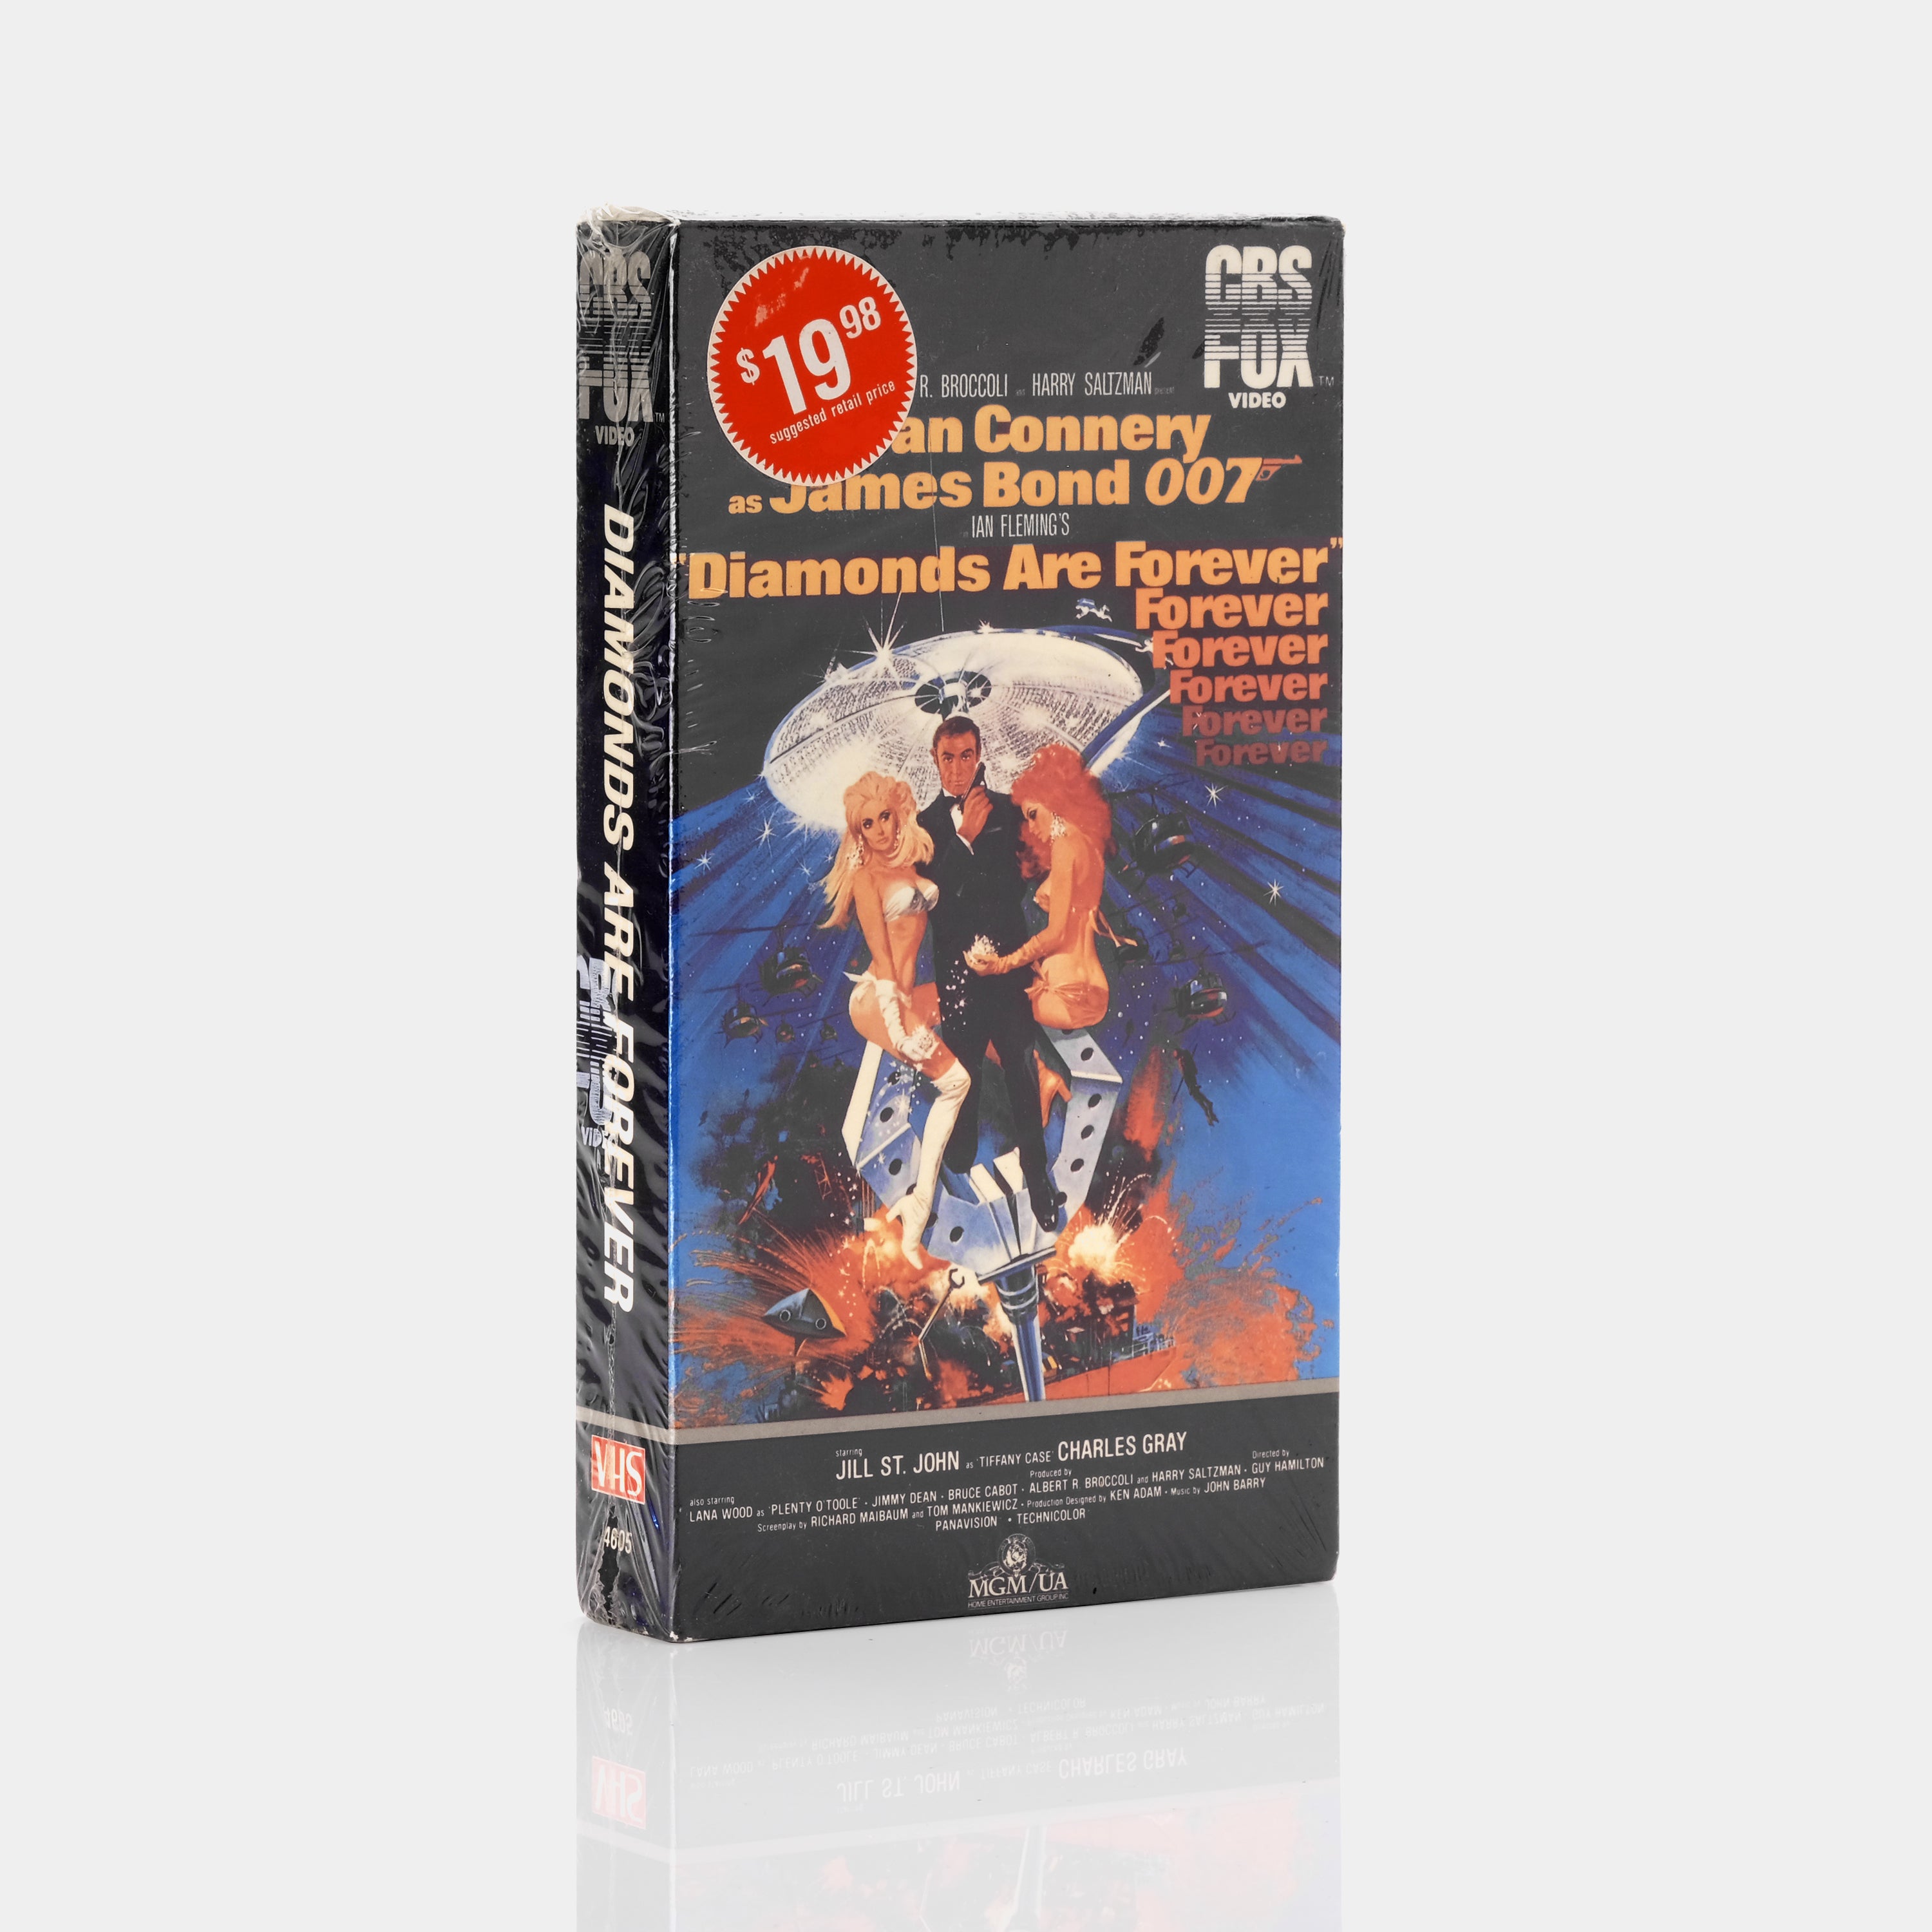 Diamonds Are Forever (Sealed) VHS Tape